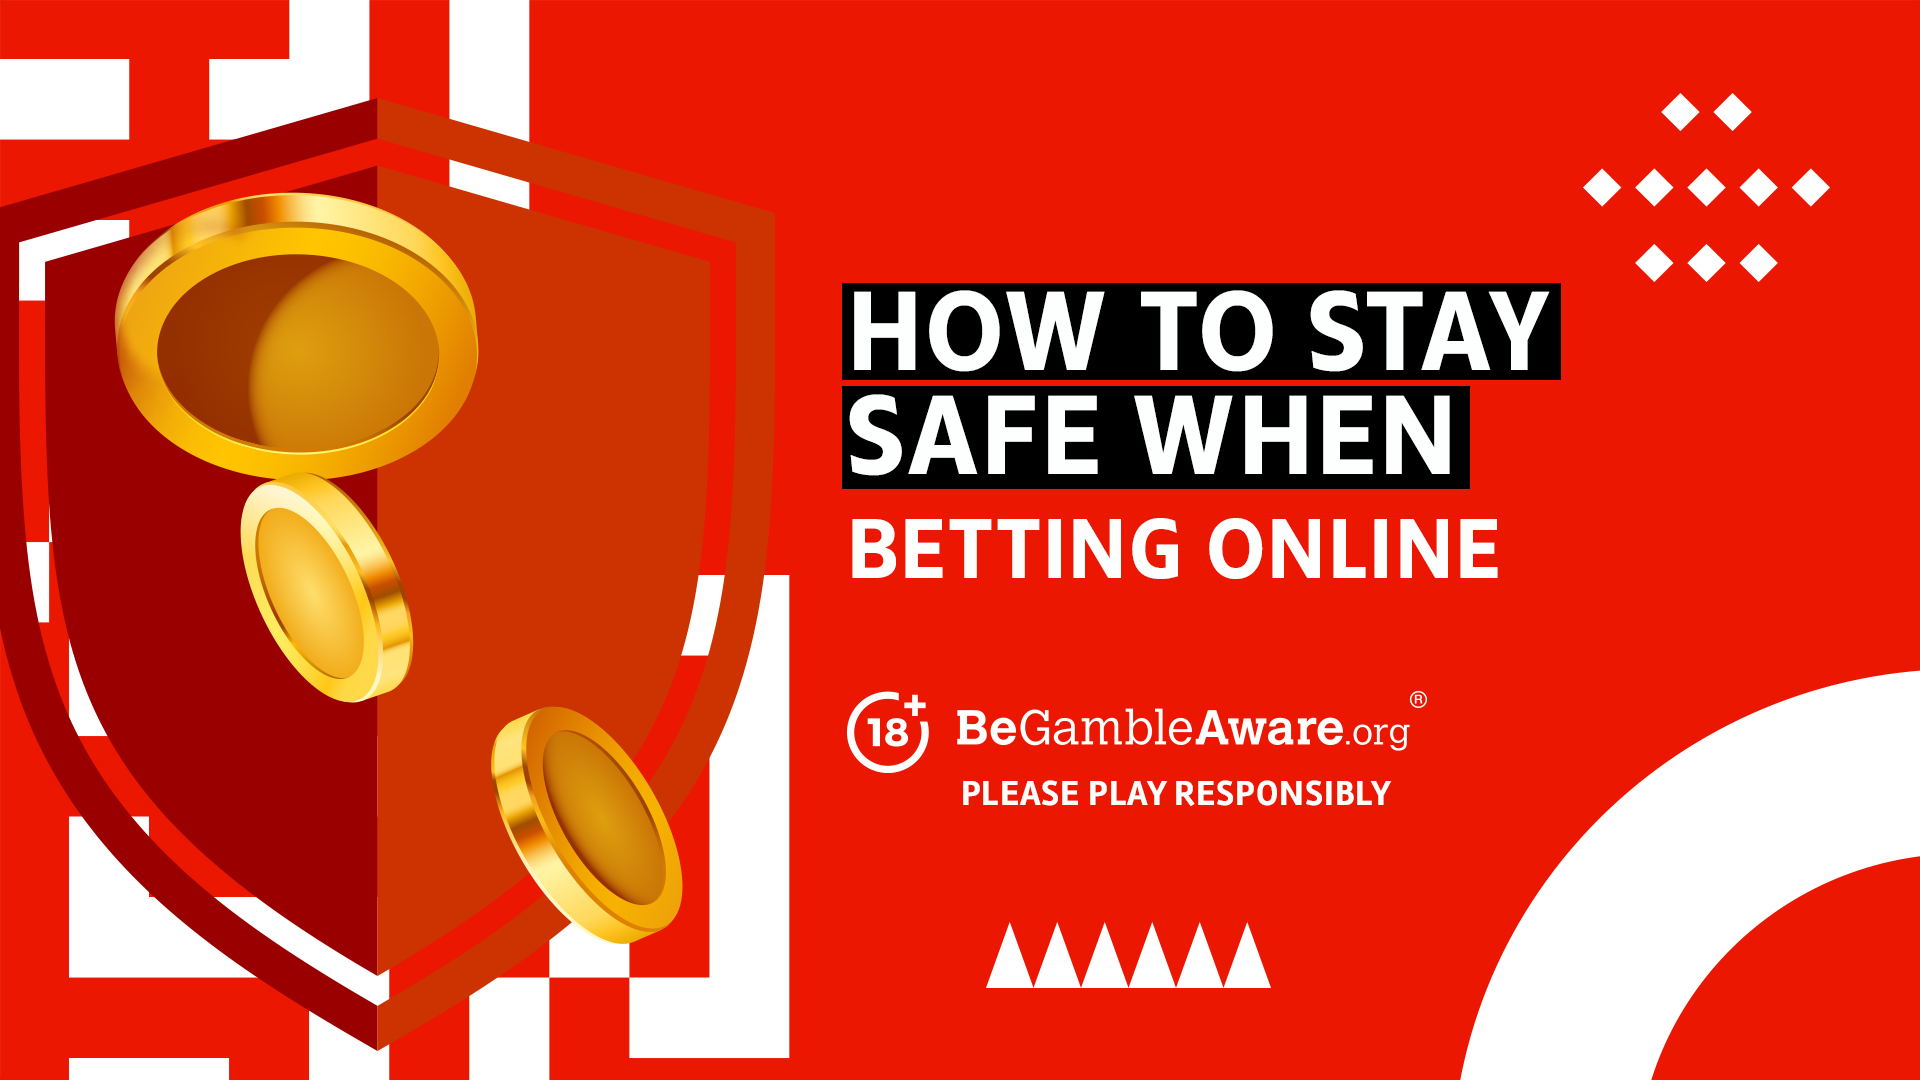 How to stay safe when betting online. 18+ BeGambleAware.org Please play responsibly.